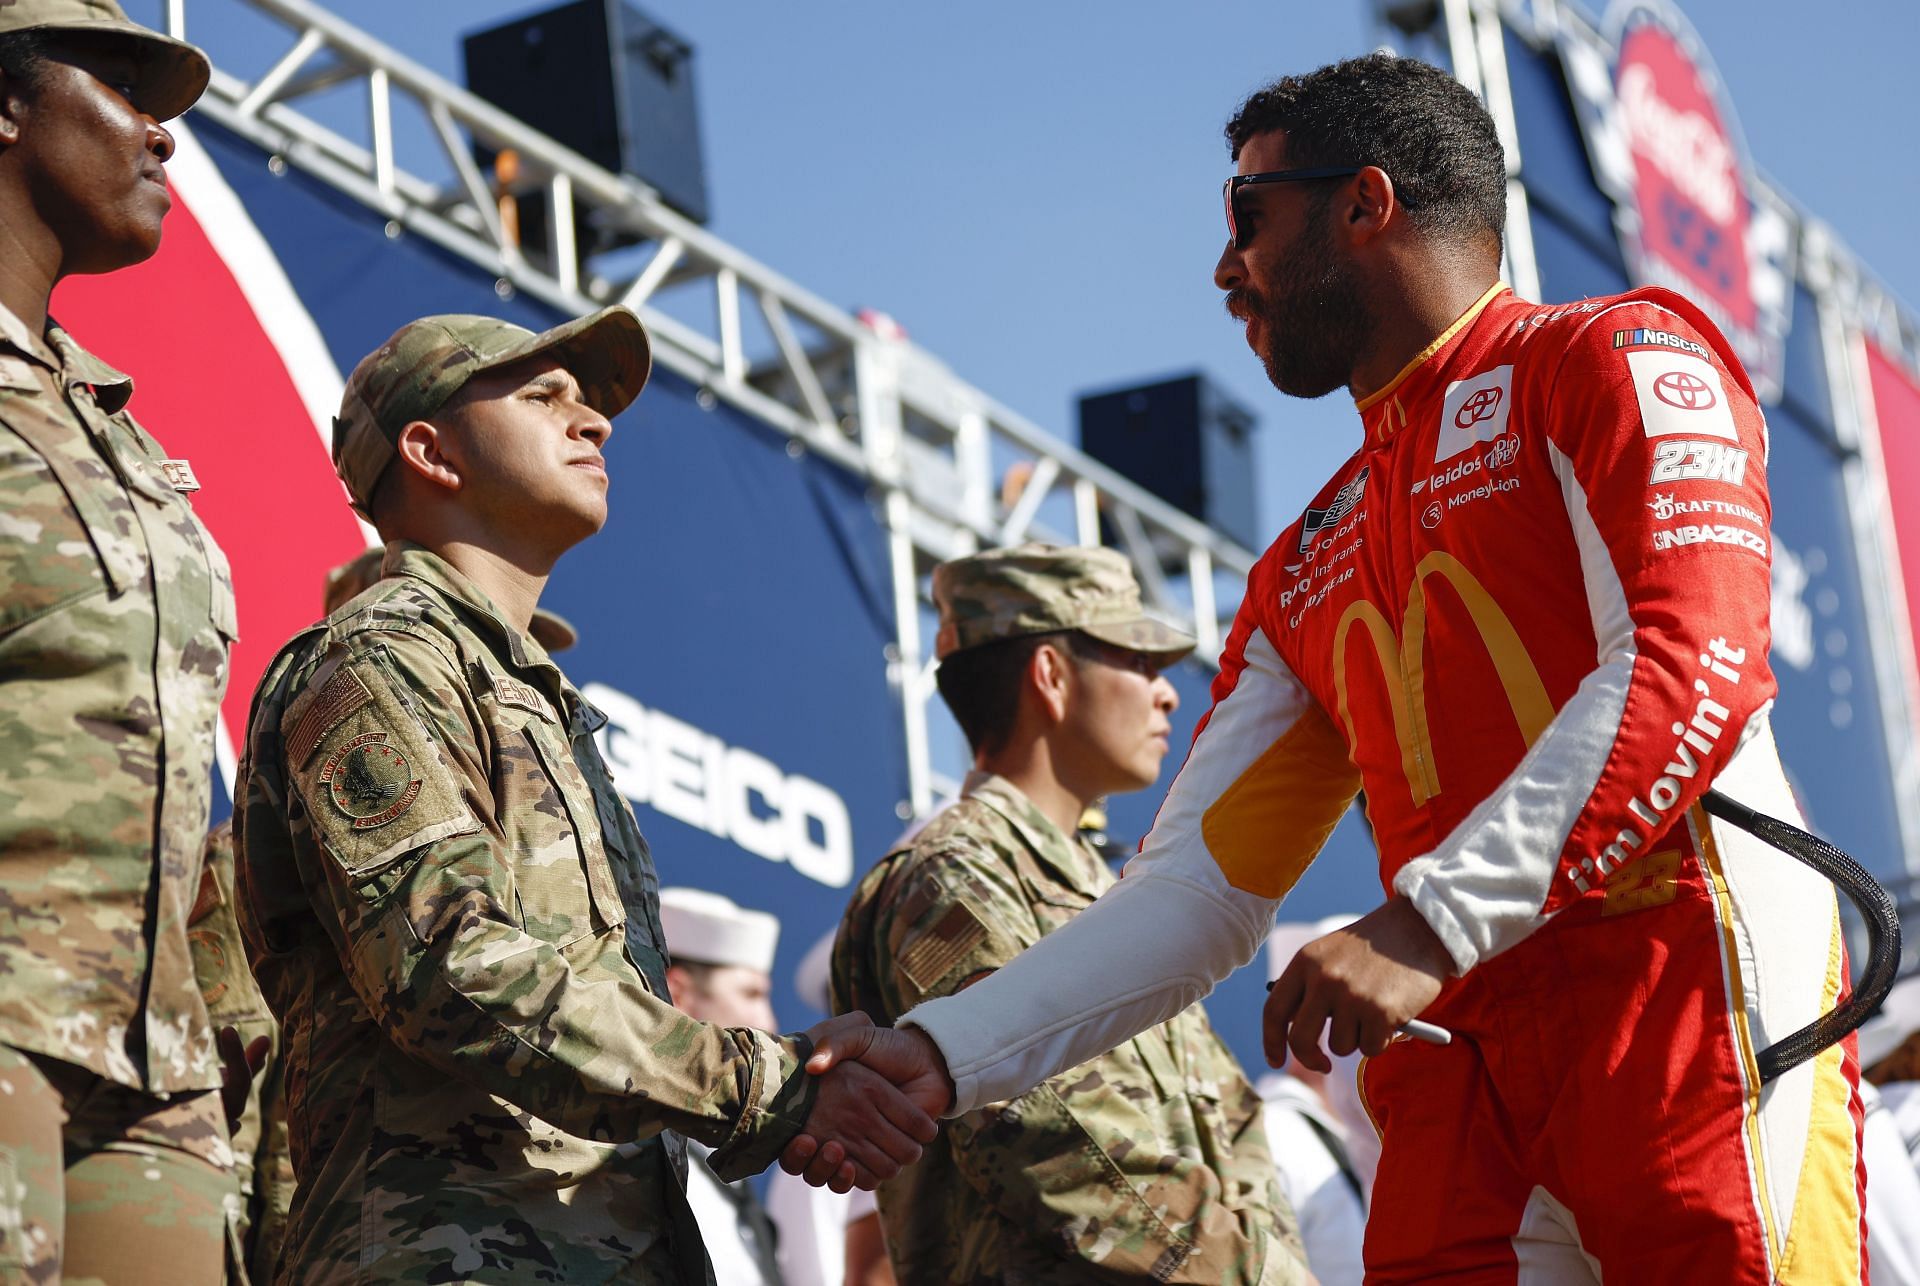 Bubba Wallace Jr., shakes hands with a service member during driver intros before the 2022 NASCAR Cup Series Coca-Cola 600 at Charlotte Motor Speedway in Concord, North Carolina. (Photo by Jared C. Tilton/Getty Images)